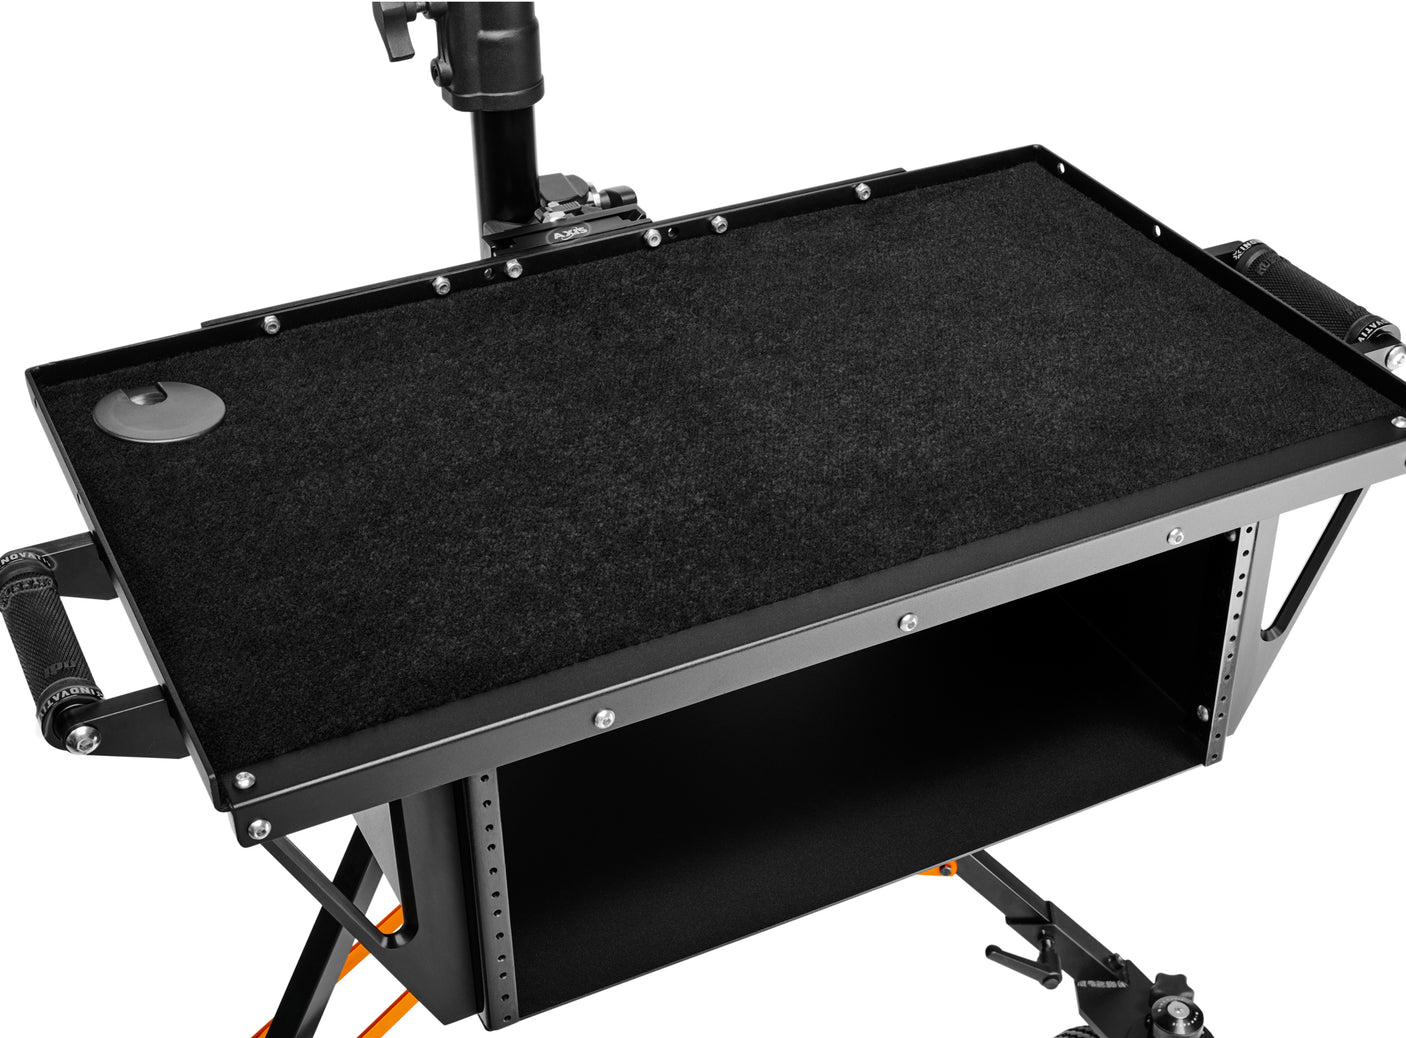 Rack Mount Station Upgrade for AXIS WorkSurface Pro